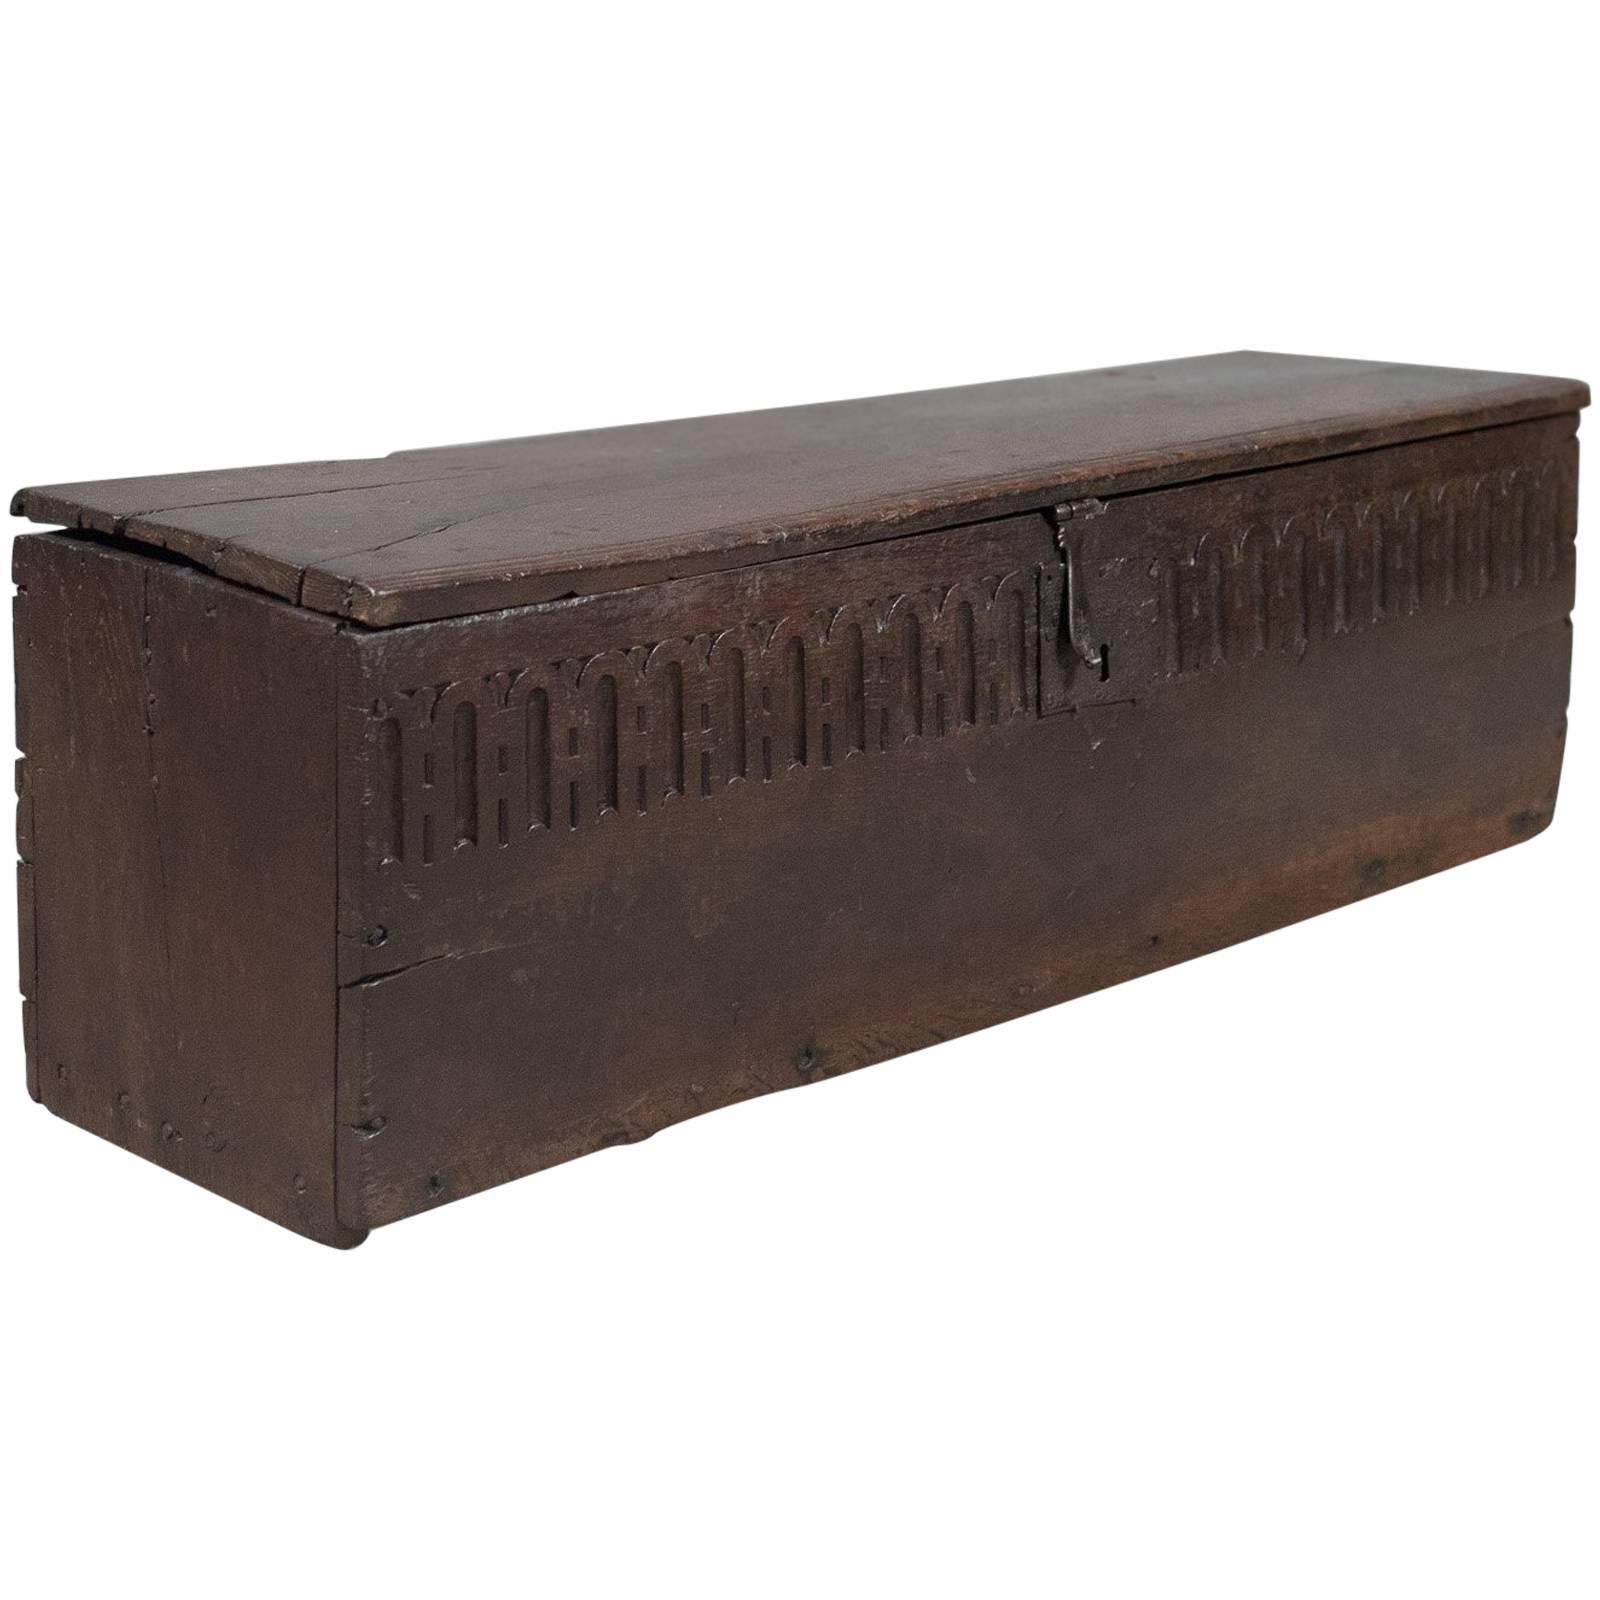 Antique Coffer in Oak, Six Plank Sword Chest, English, Mid-17th Century Trunk